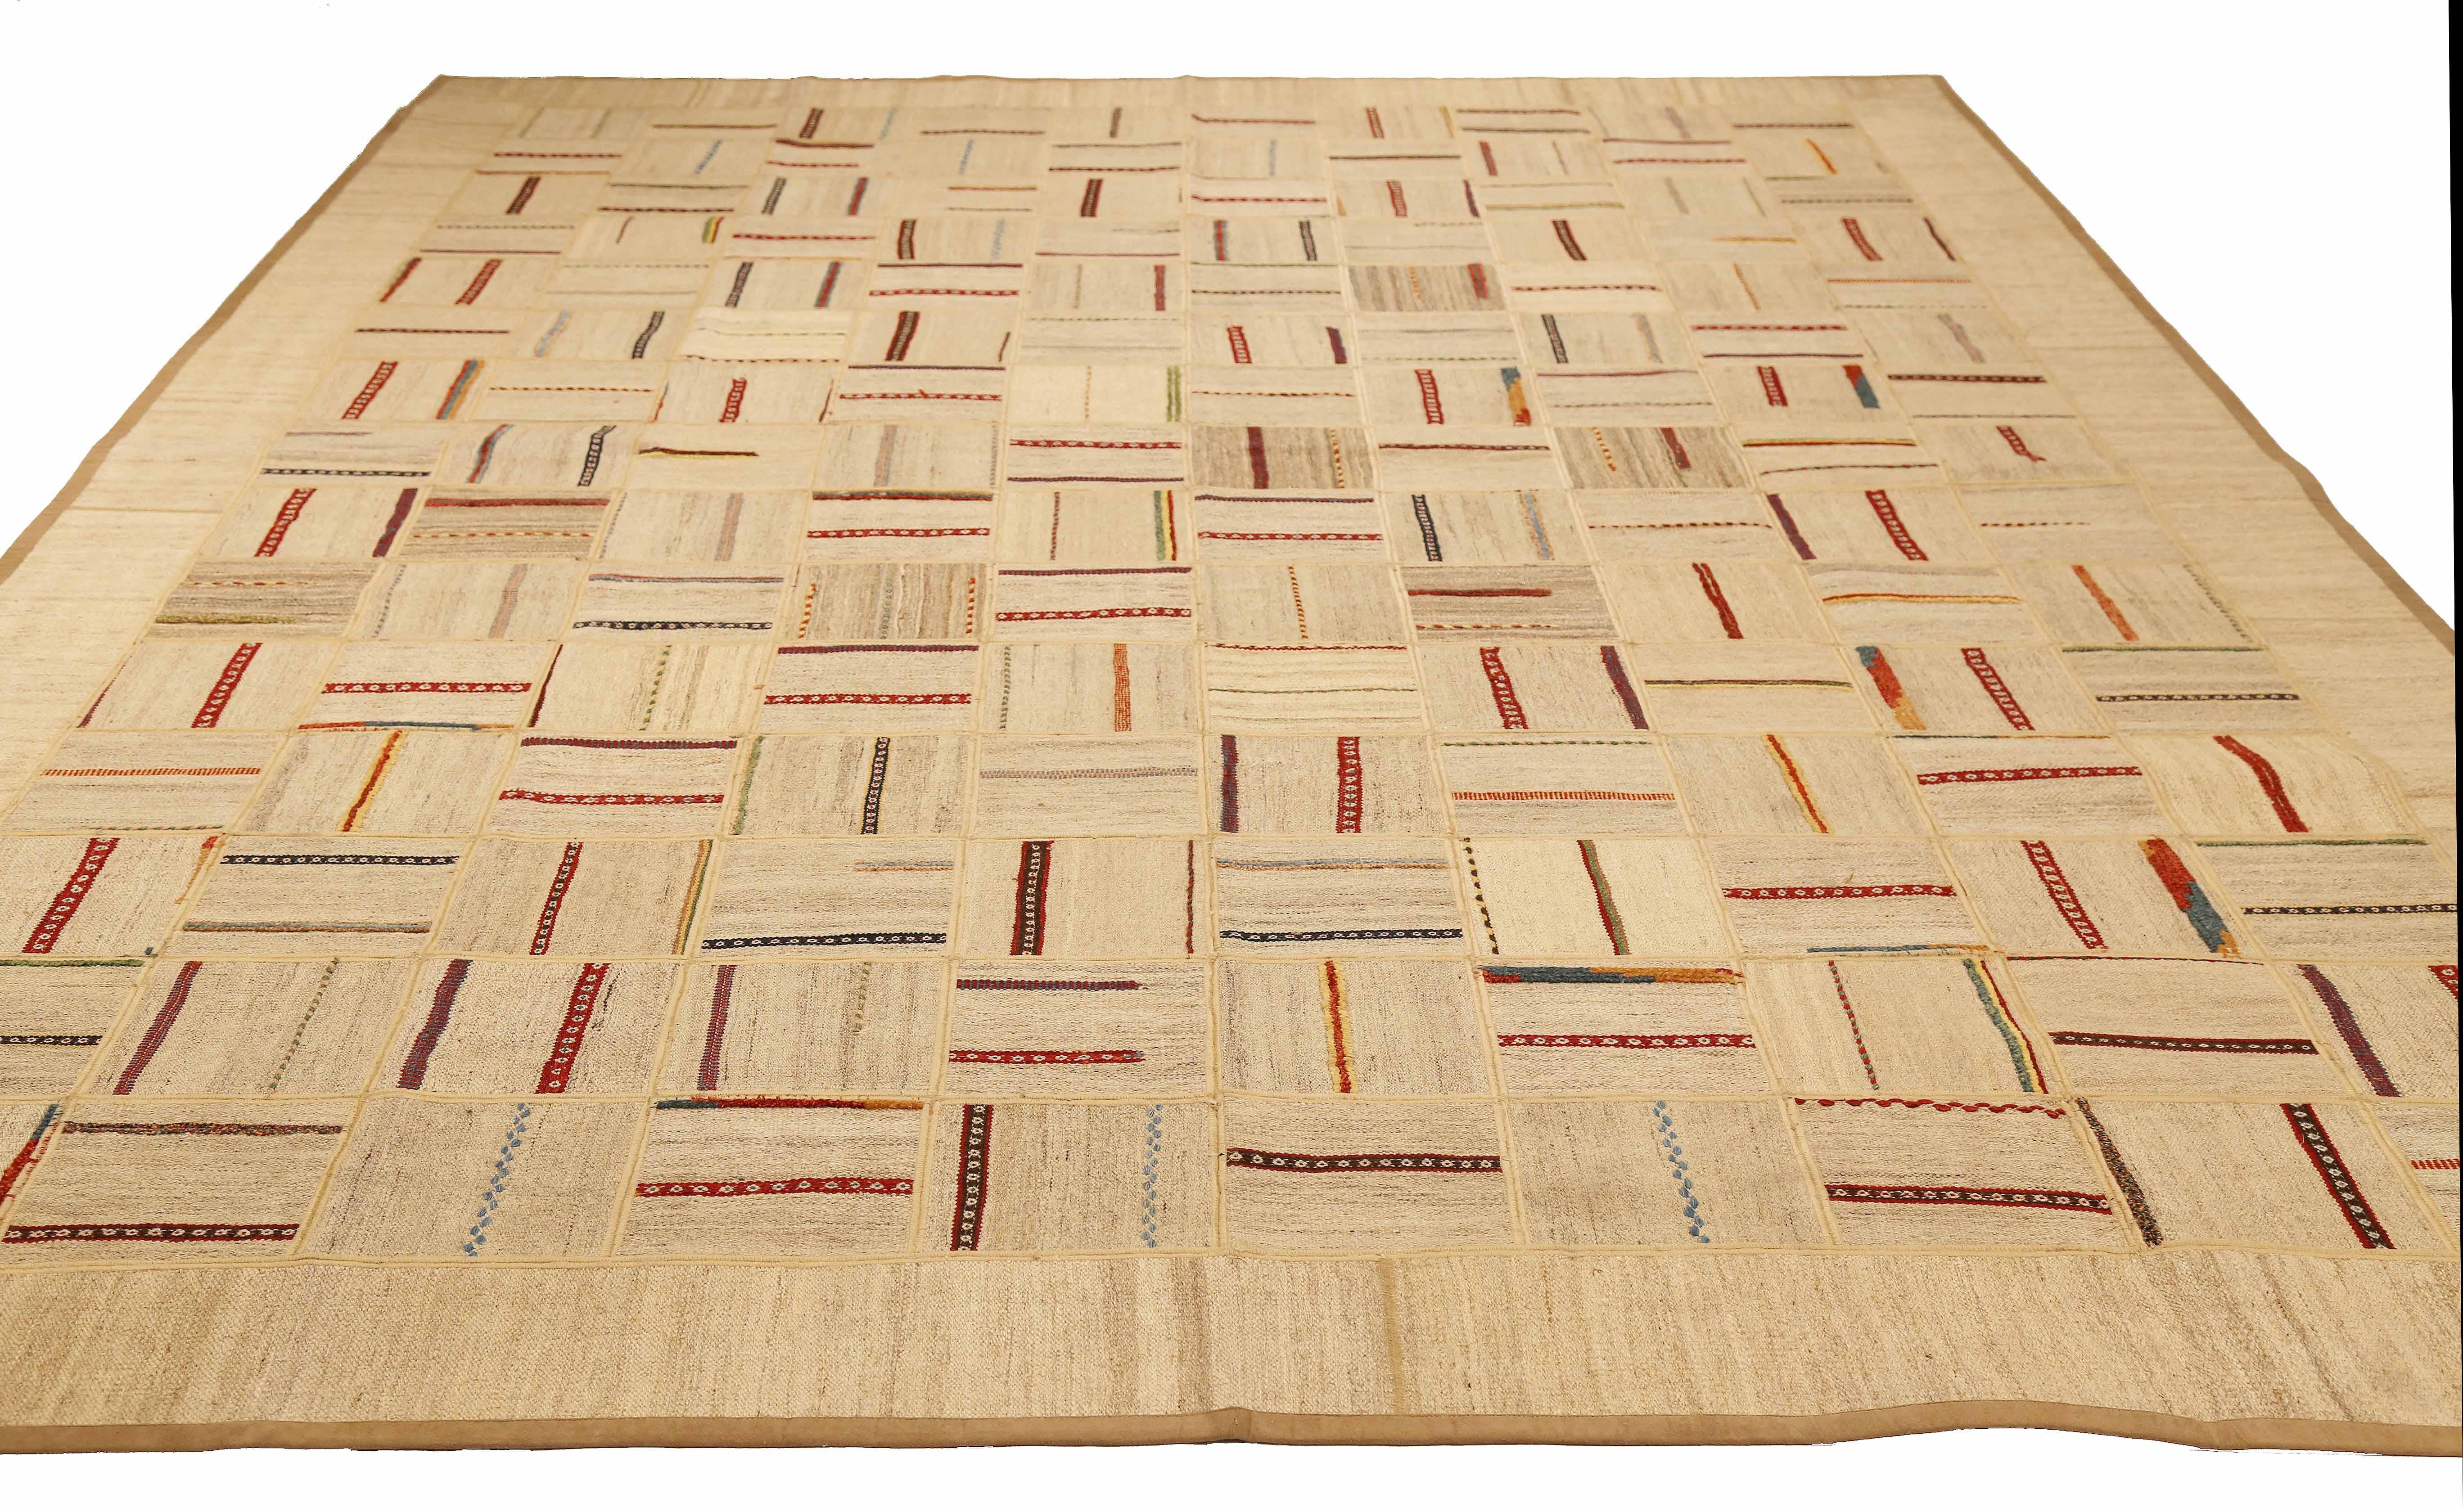 Modern Turkish rug handwoven from the finest sheep’s wool and colored with all-natural vegetable dyes that are safe for humans and pets. It’s a traditional Patch Kilim flat-weave design featuring vibrant and colorful tribal bands on a beige and